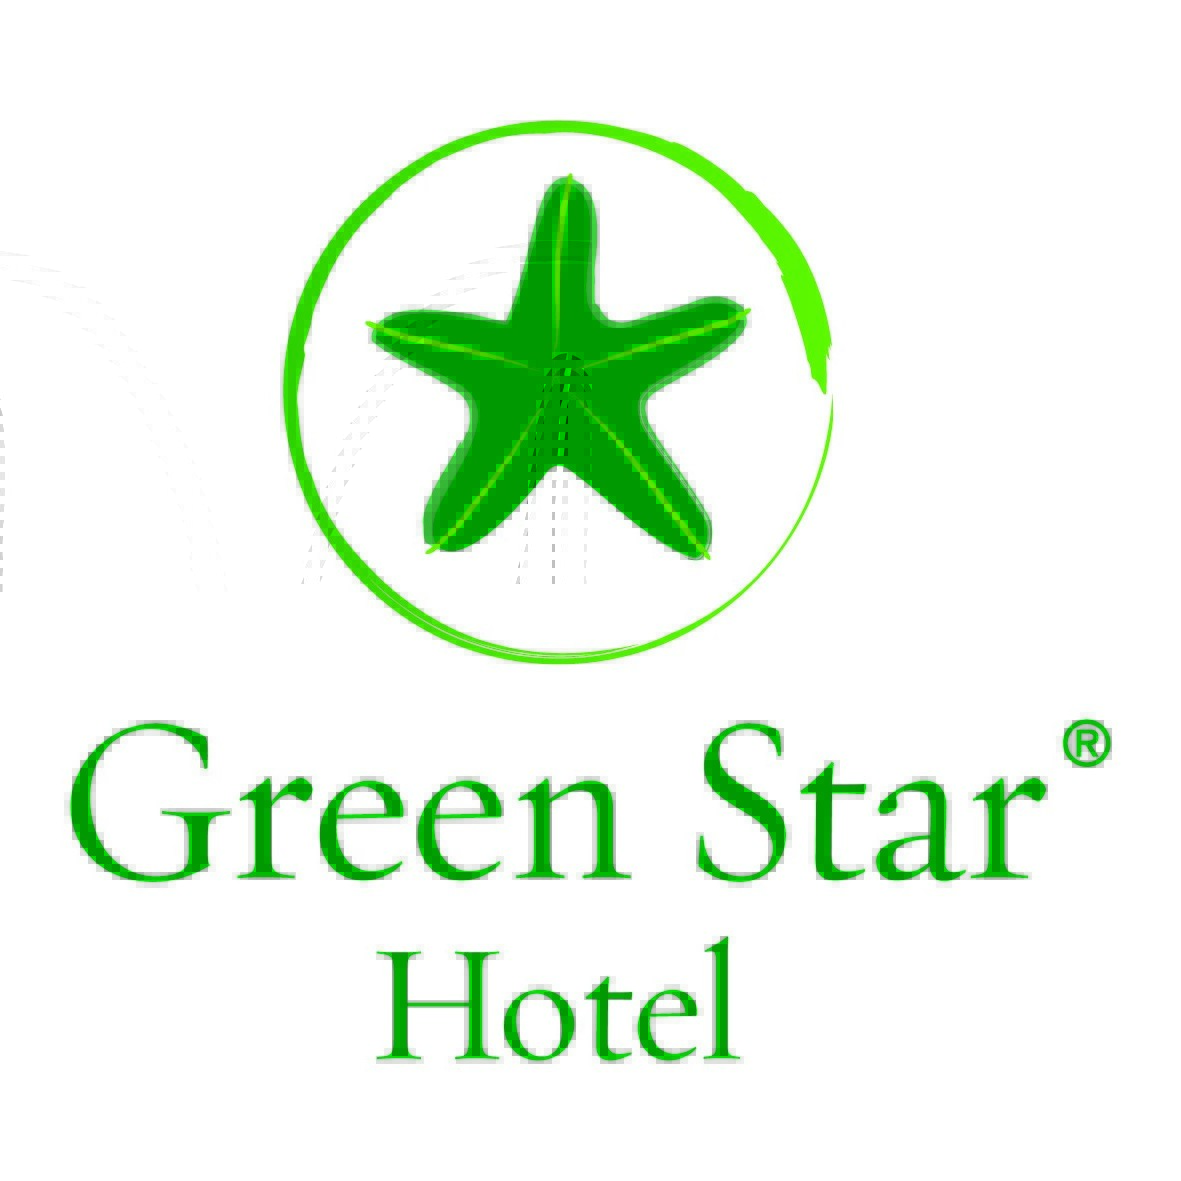 Green Star Hotel Achieves GSTC Recognition